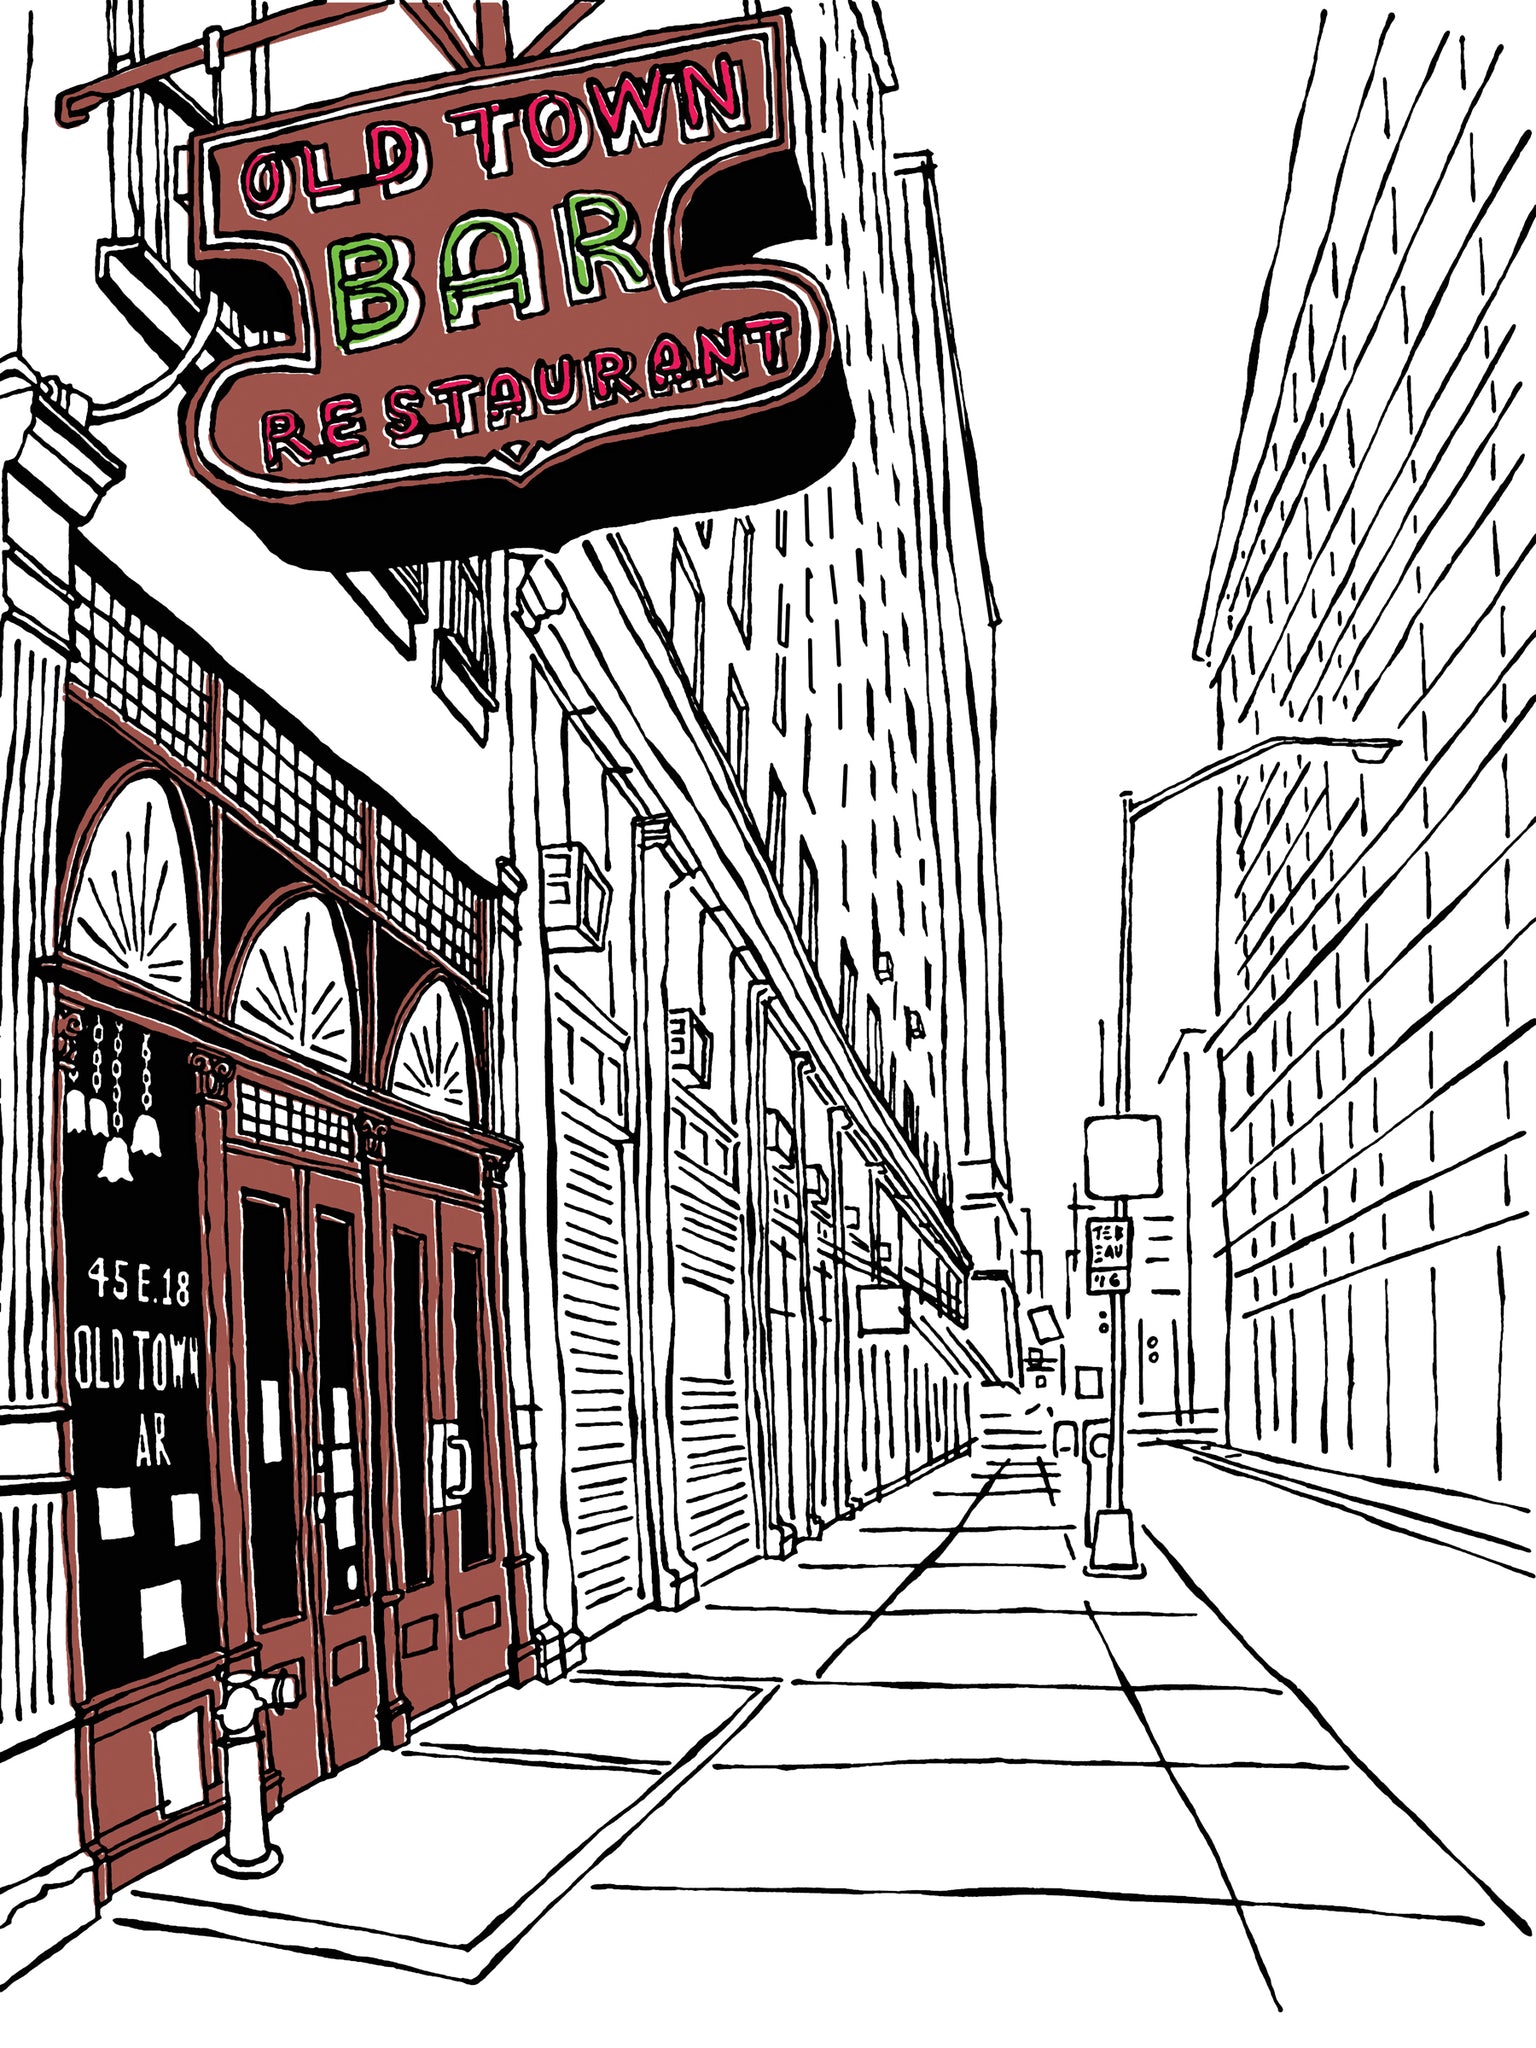 Old Town Bar of New York signed art prints